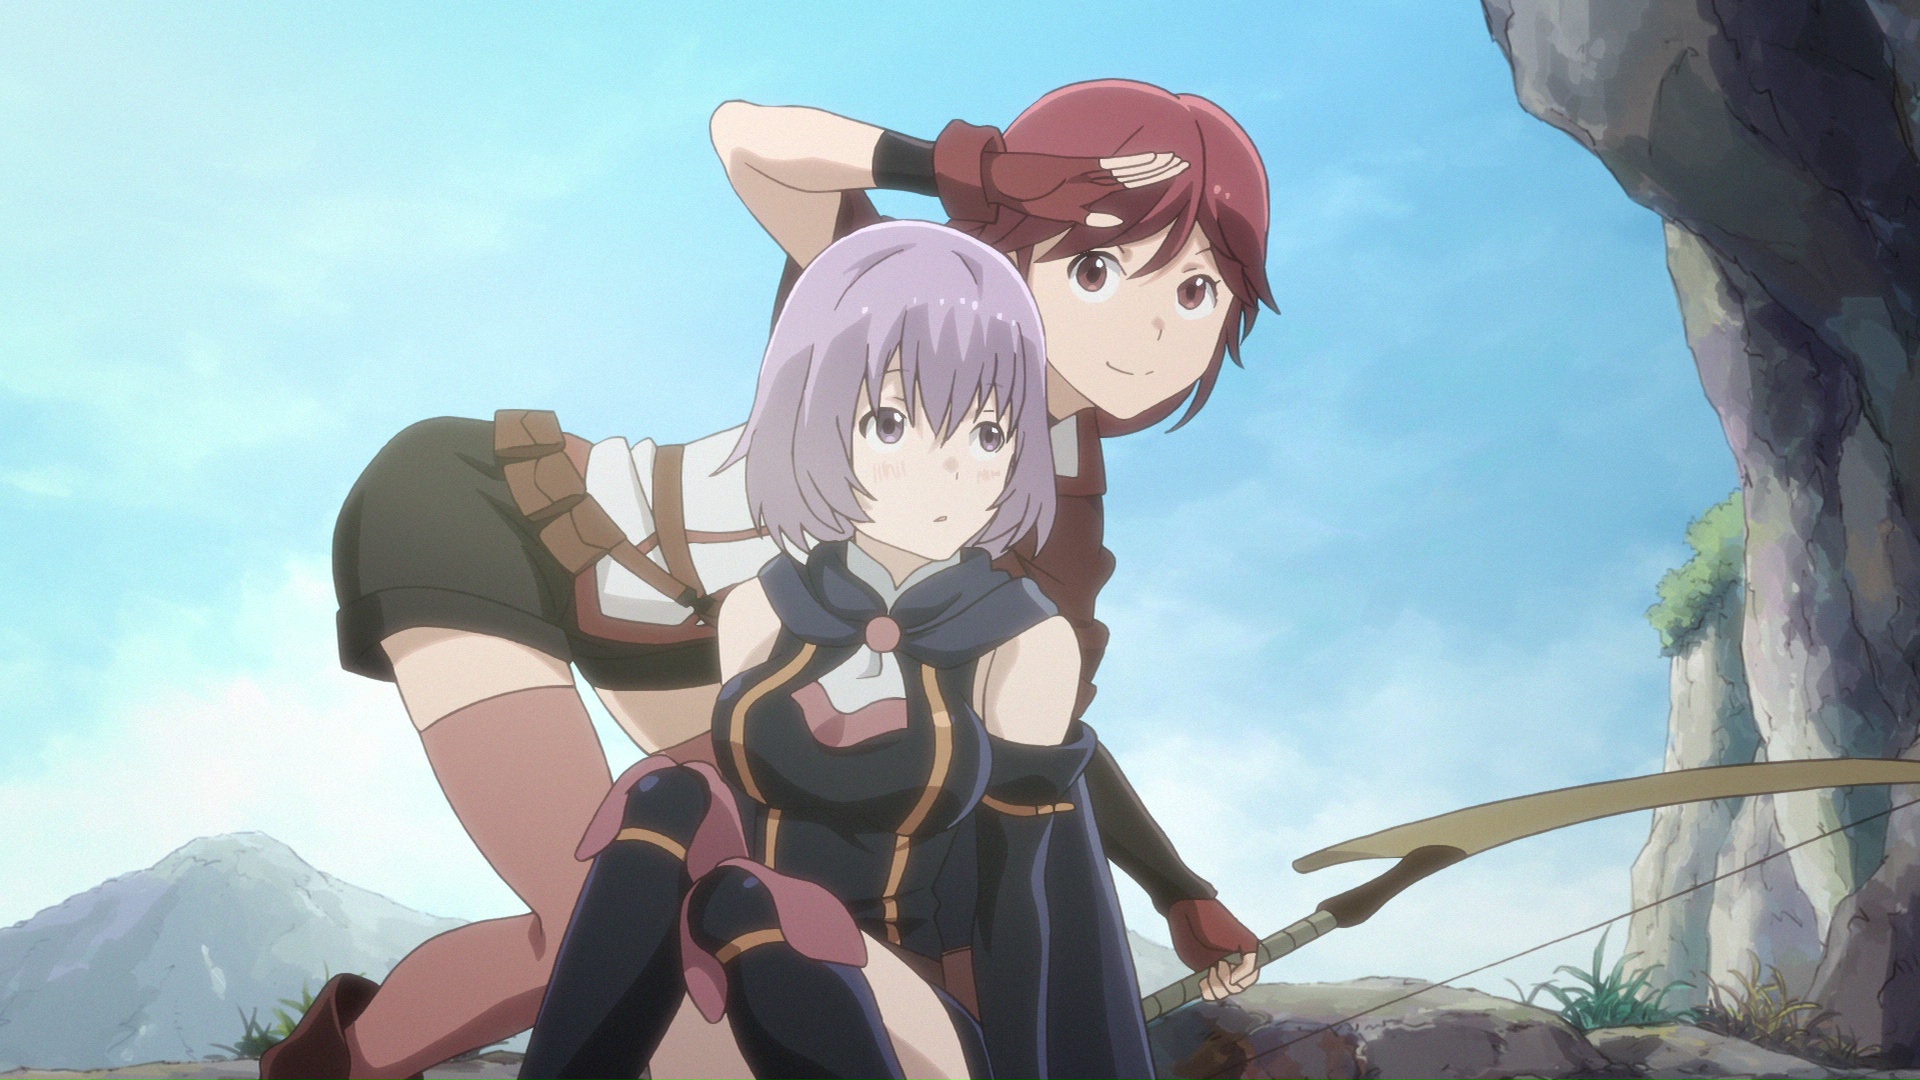 Download Watch Grimgar Ashes And Illusions Season 1 Episode 1 Sub Dub For F...